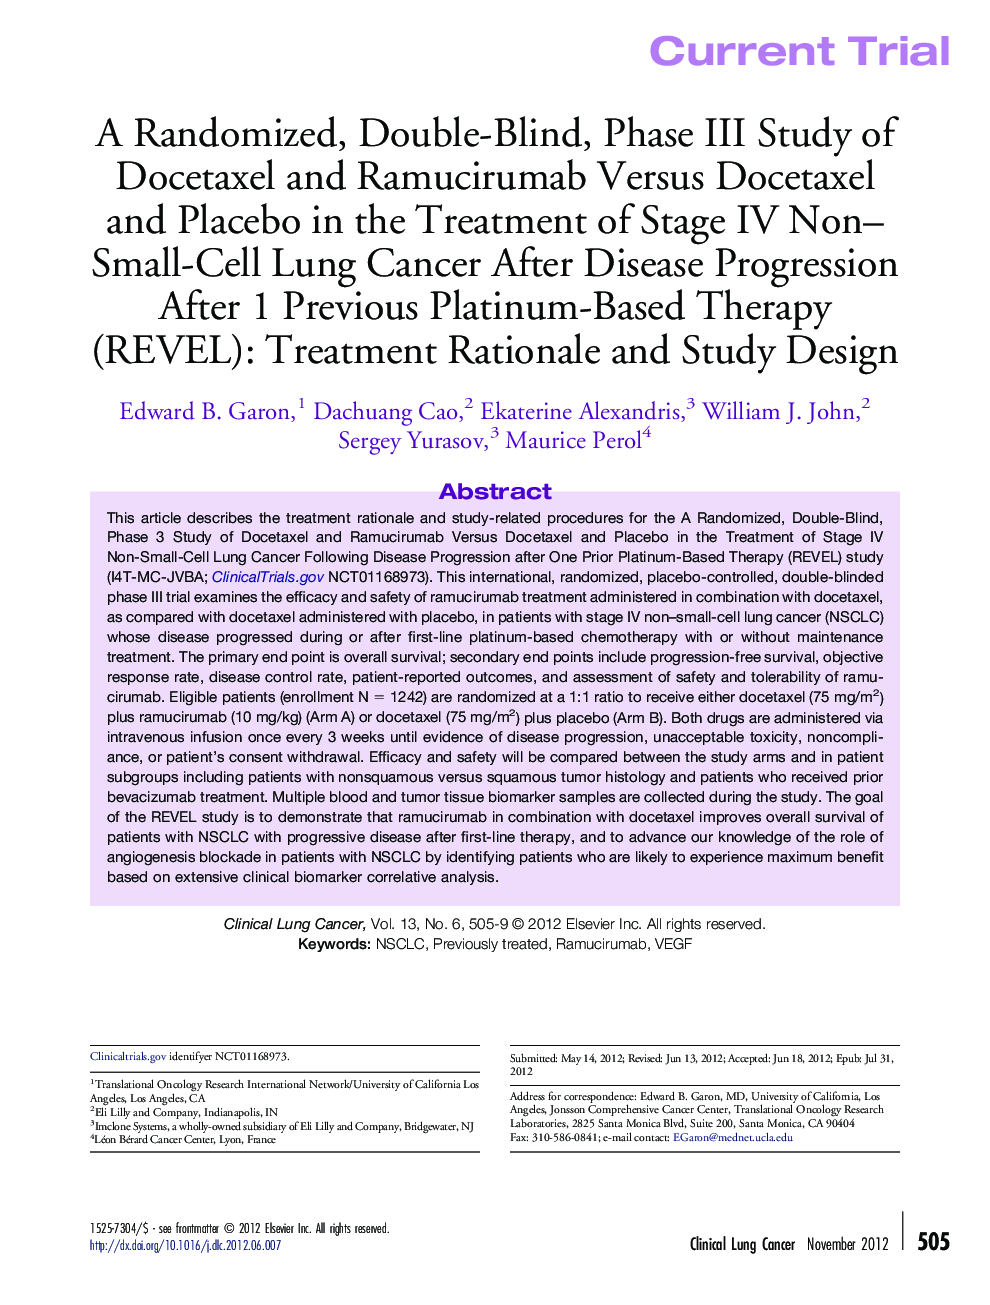 A Randomized, Double-Blind, Phase III Study of Docetaxel and Ramucirumab Versus Docetaxel and Placebo in the Treatment of Stage IV Non–Small-Cell Lung Cancer After Disease Progression After 1 Previous Platinum-Based Therapy (REVEL): Treatment Rationale an